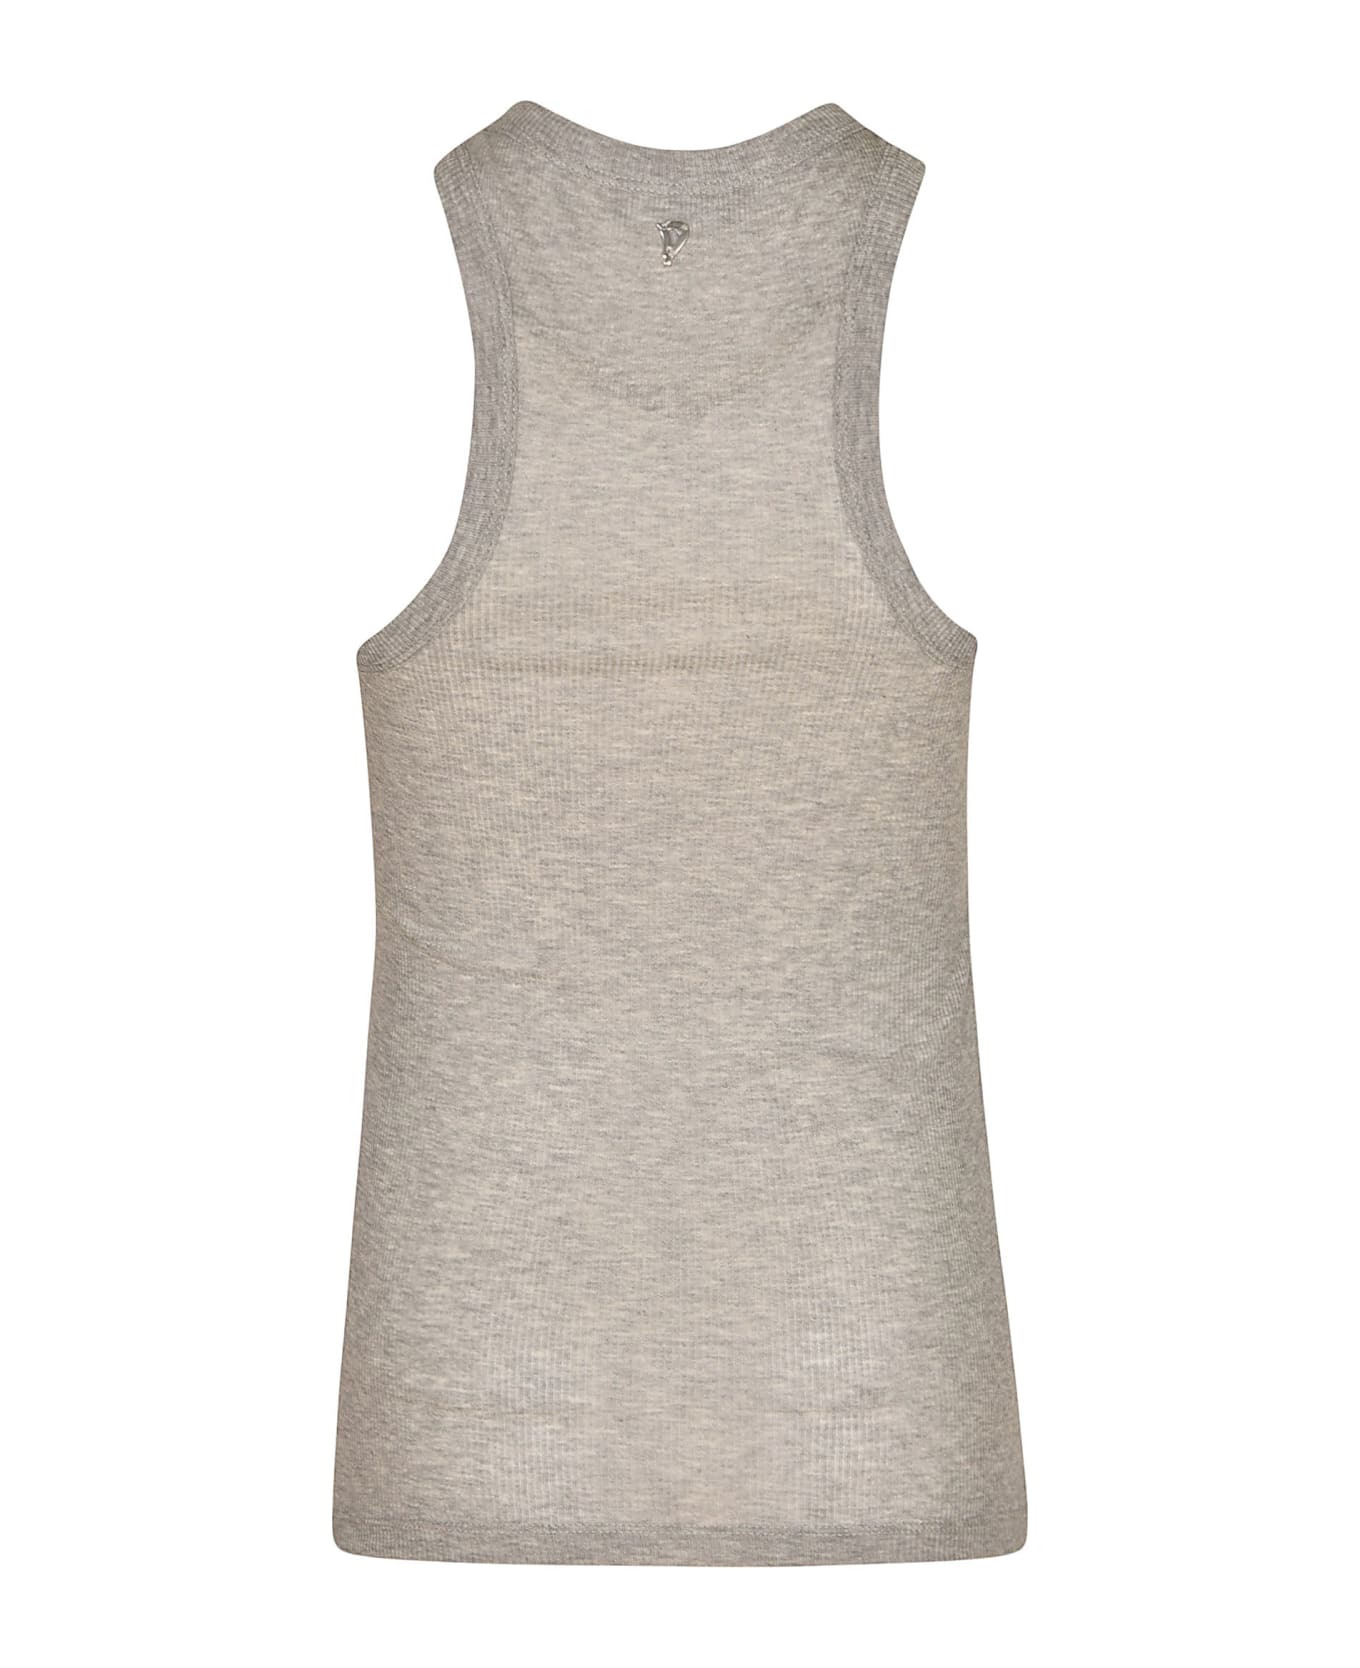 Dondup Cotton Fitted Tank Top - Grey